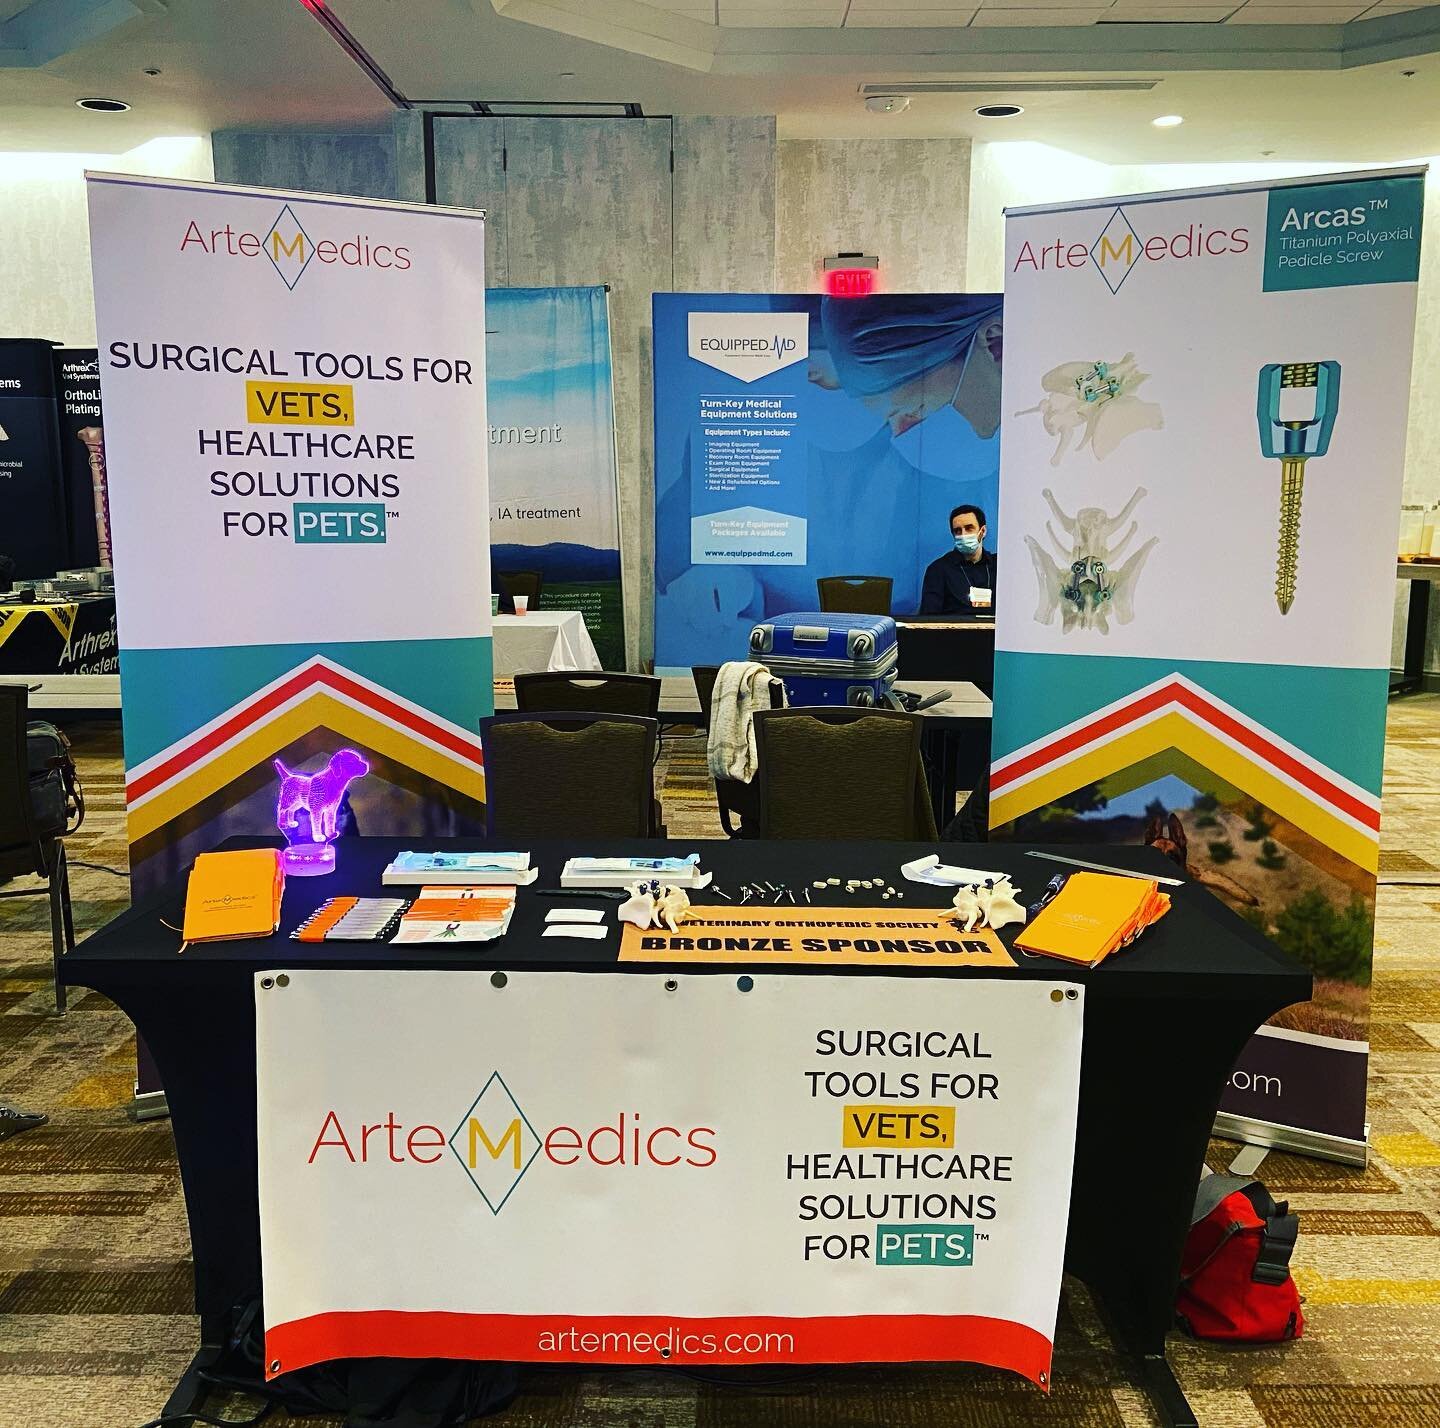 ArteMedics is so excited to be a Bronze Sponsor at VOS this year! It&rsquo;s great to be back in person sharing our excitement of our ArcasUltra polyaxial product line! New, smaller sizes coming in 2022!